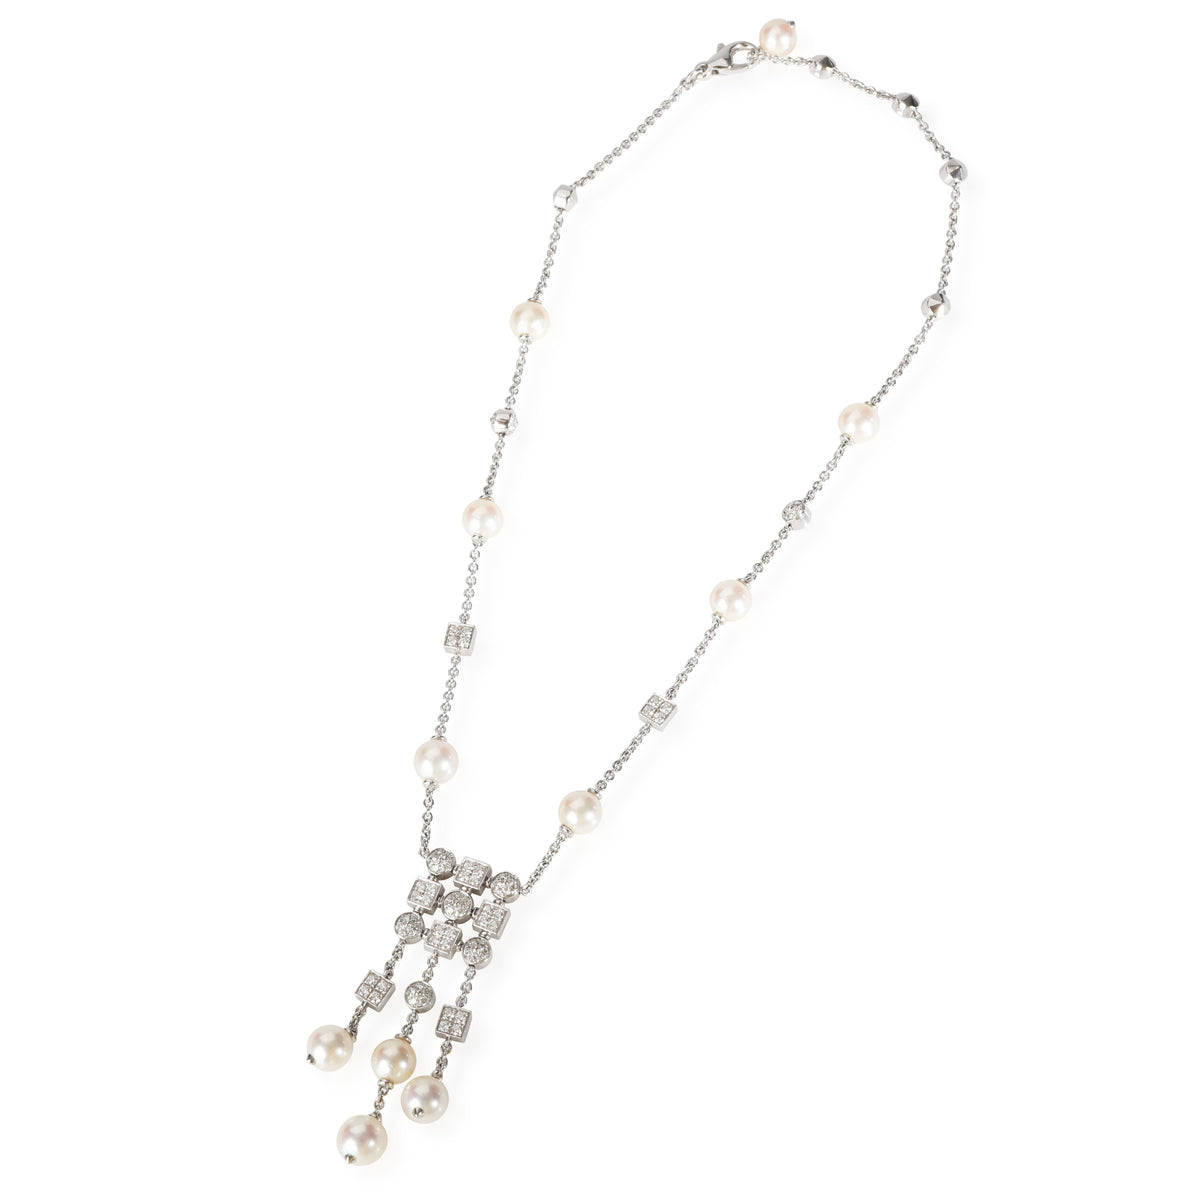 Lucea Pearl & Diamond Drop Necklace in 18K White Gold 1.56 CTW